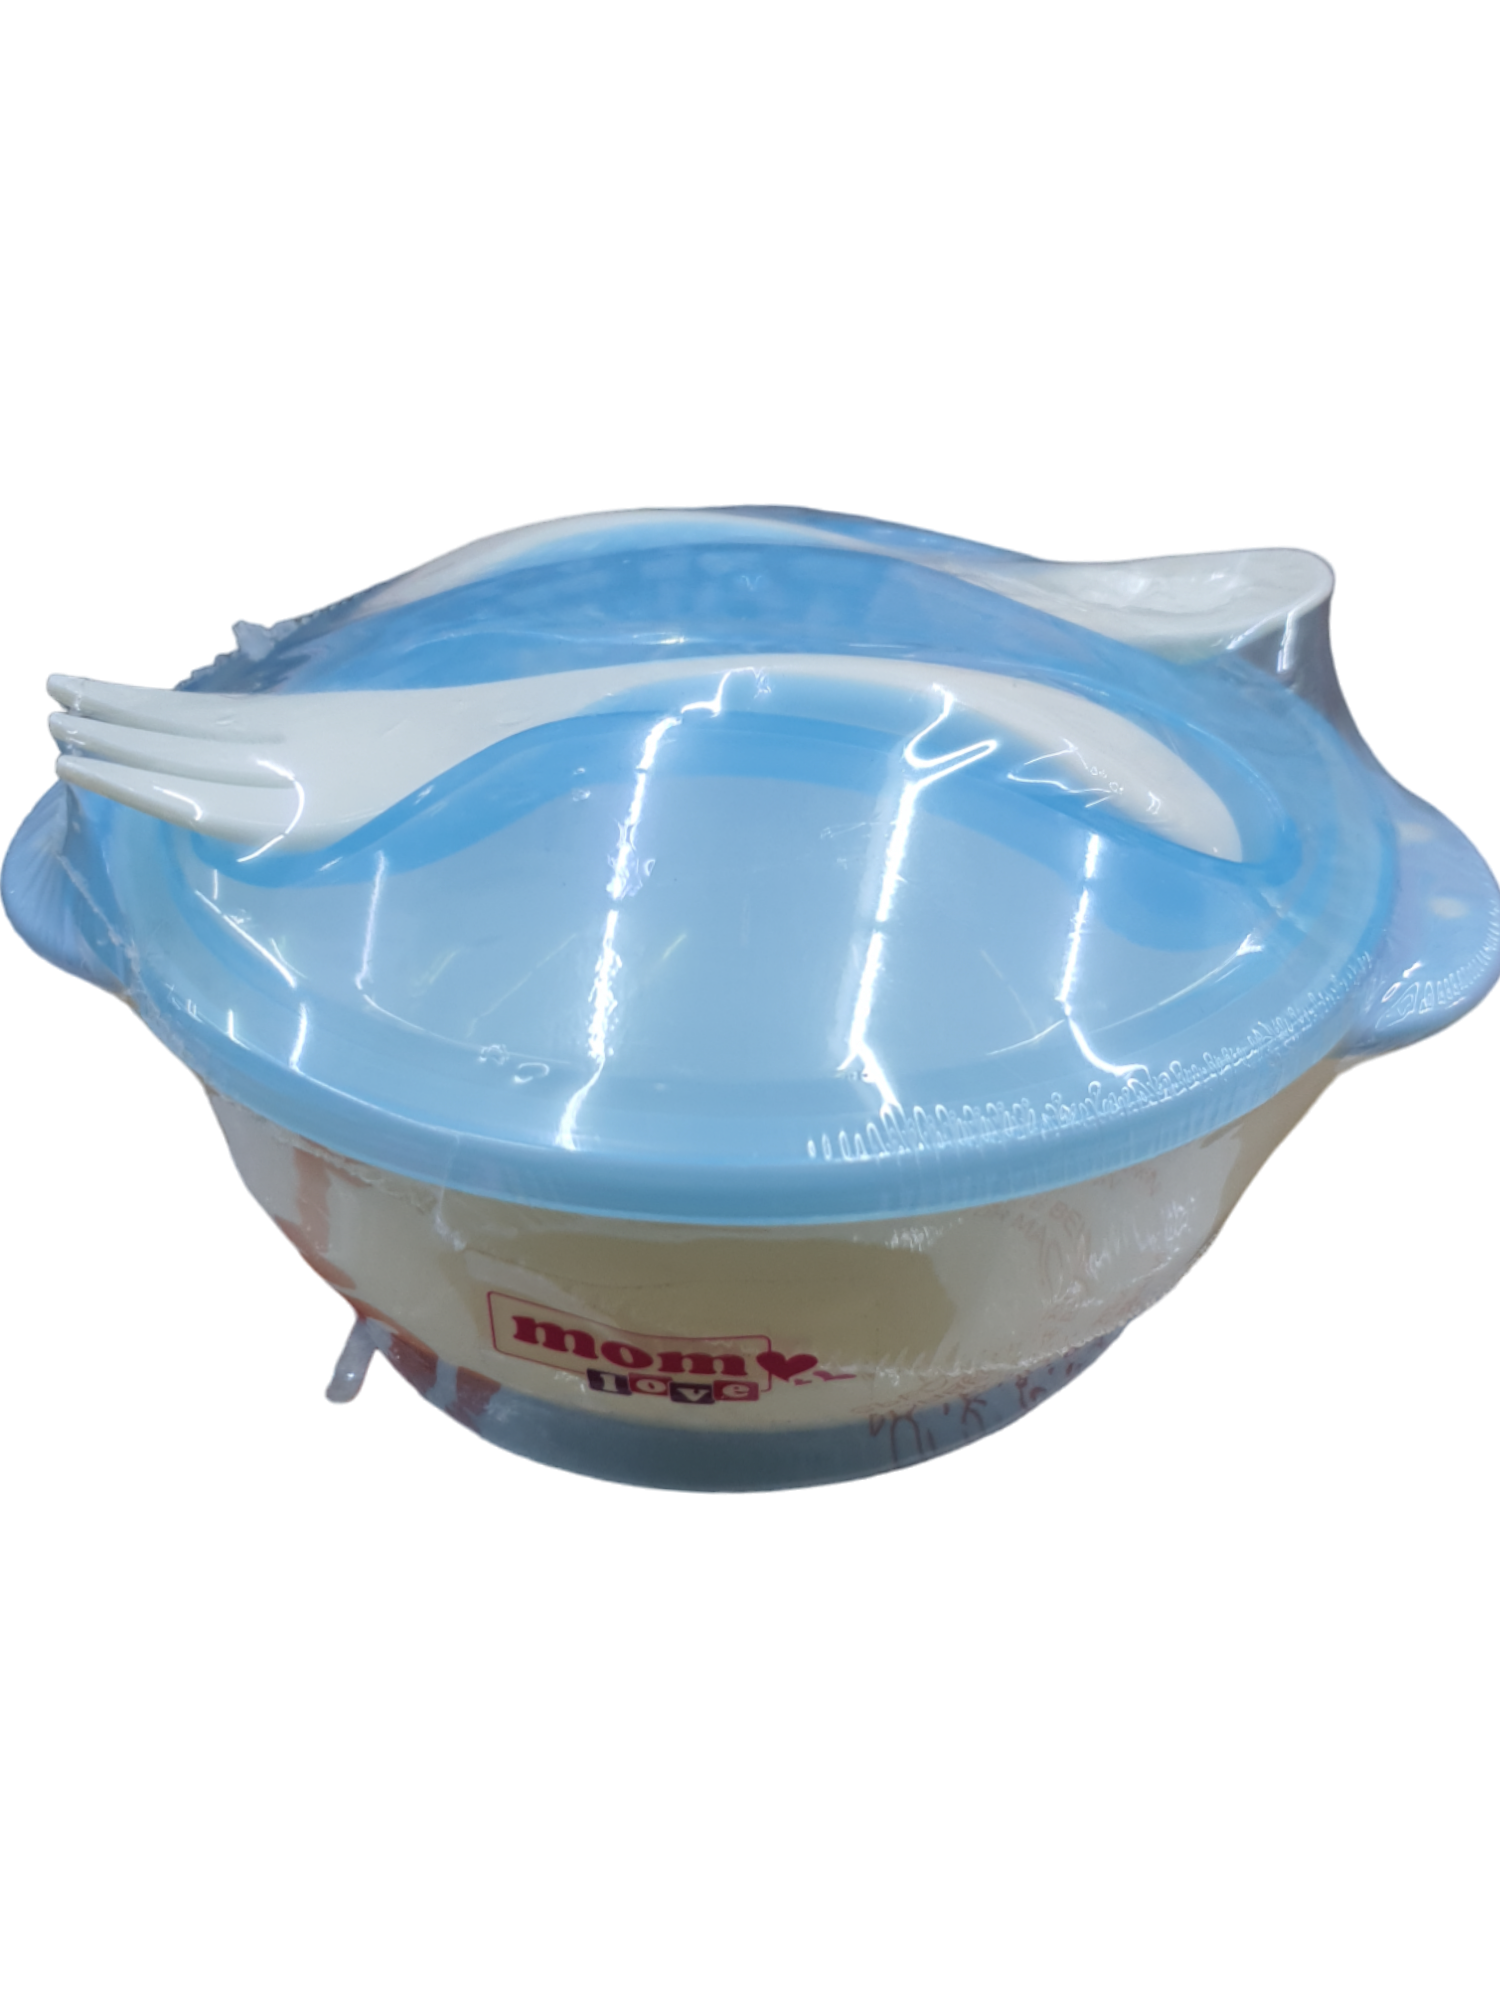 Momlove Bowl Set With Suction